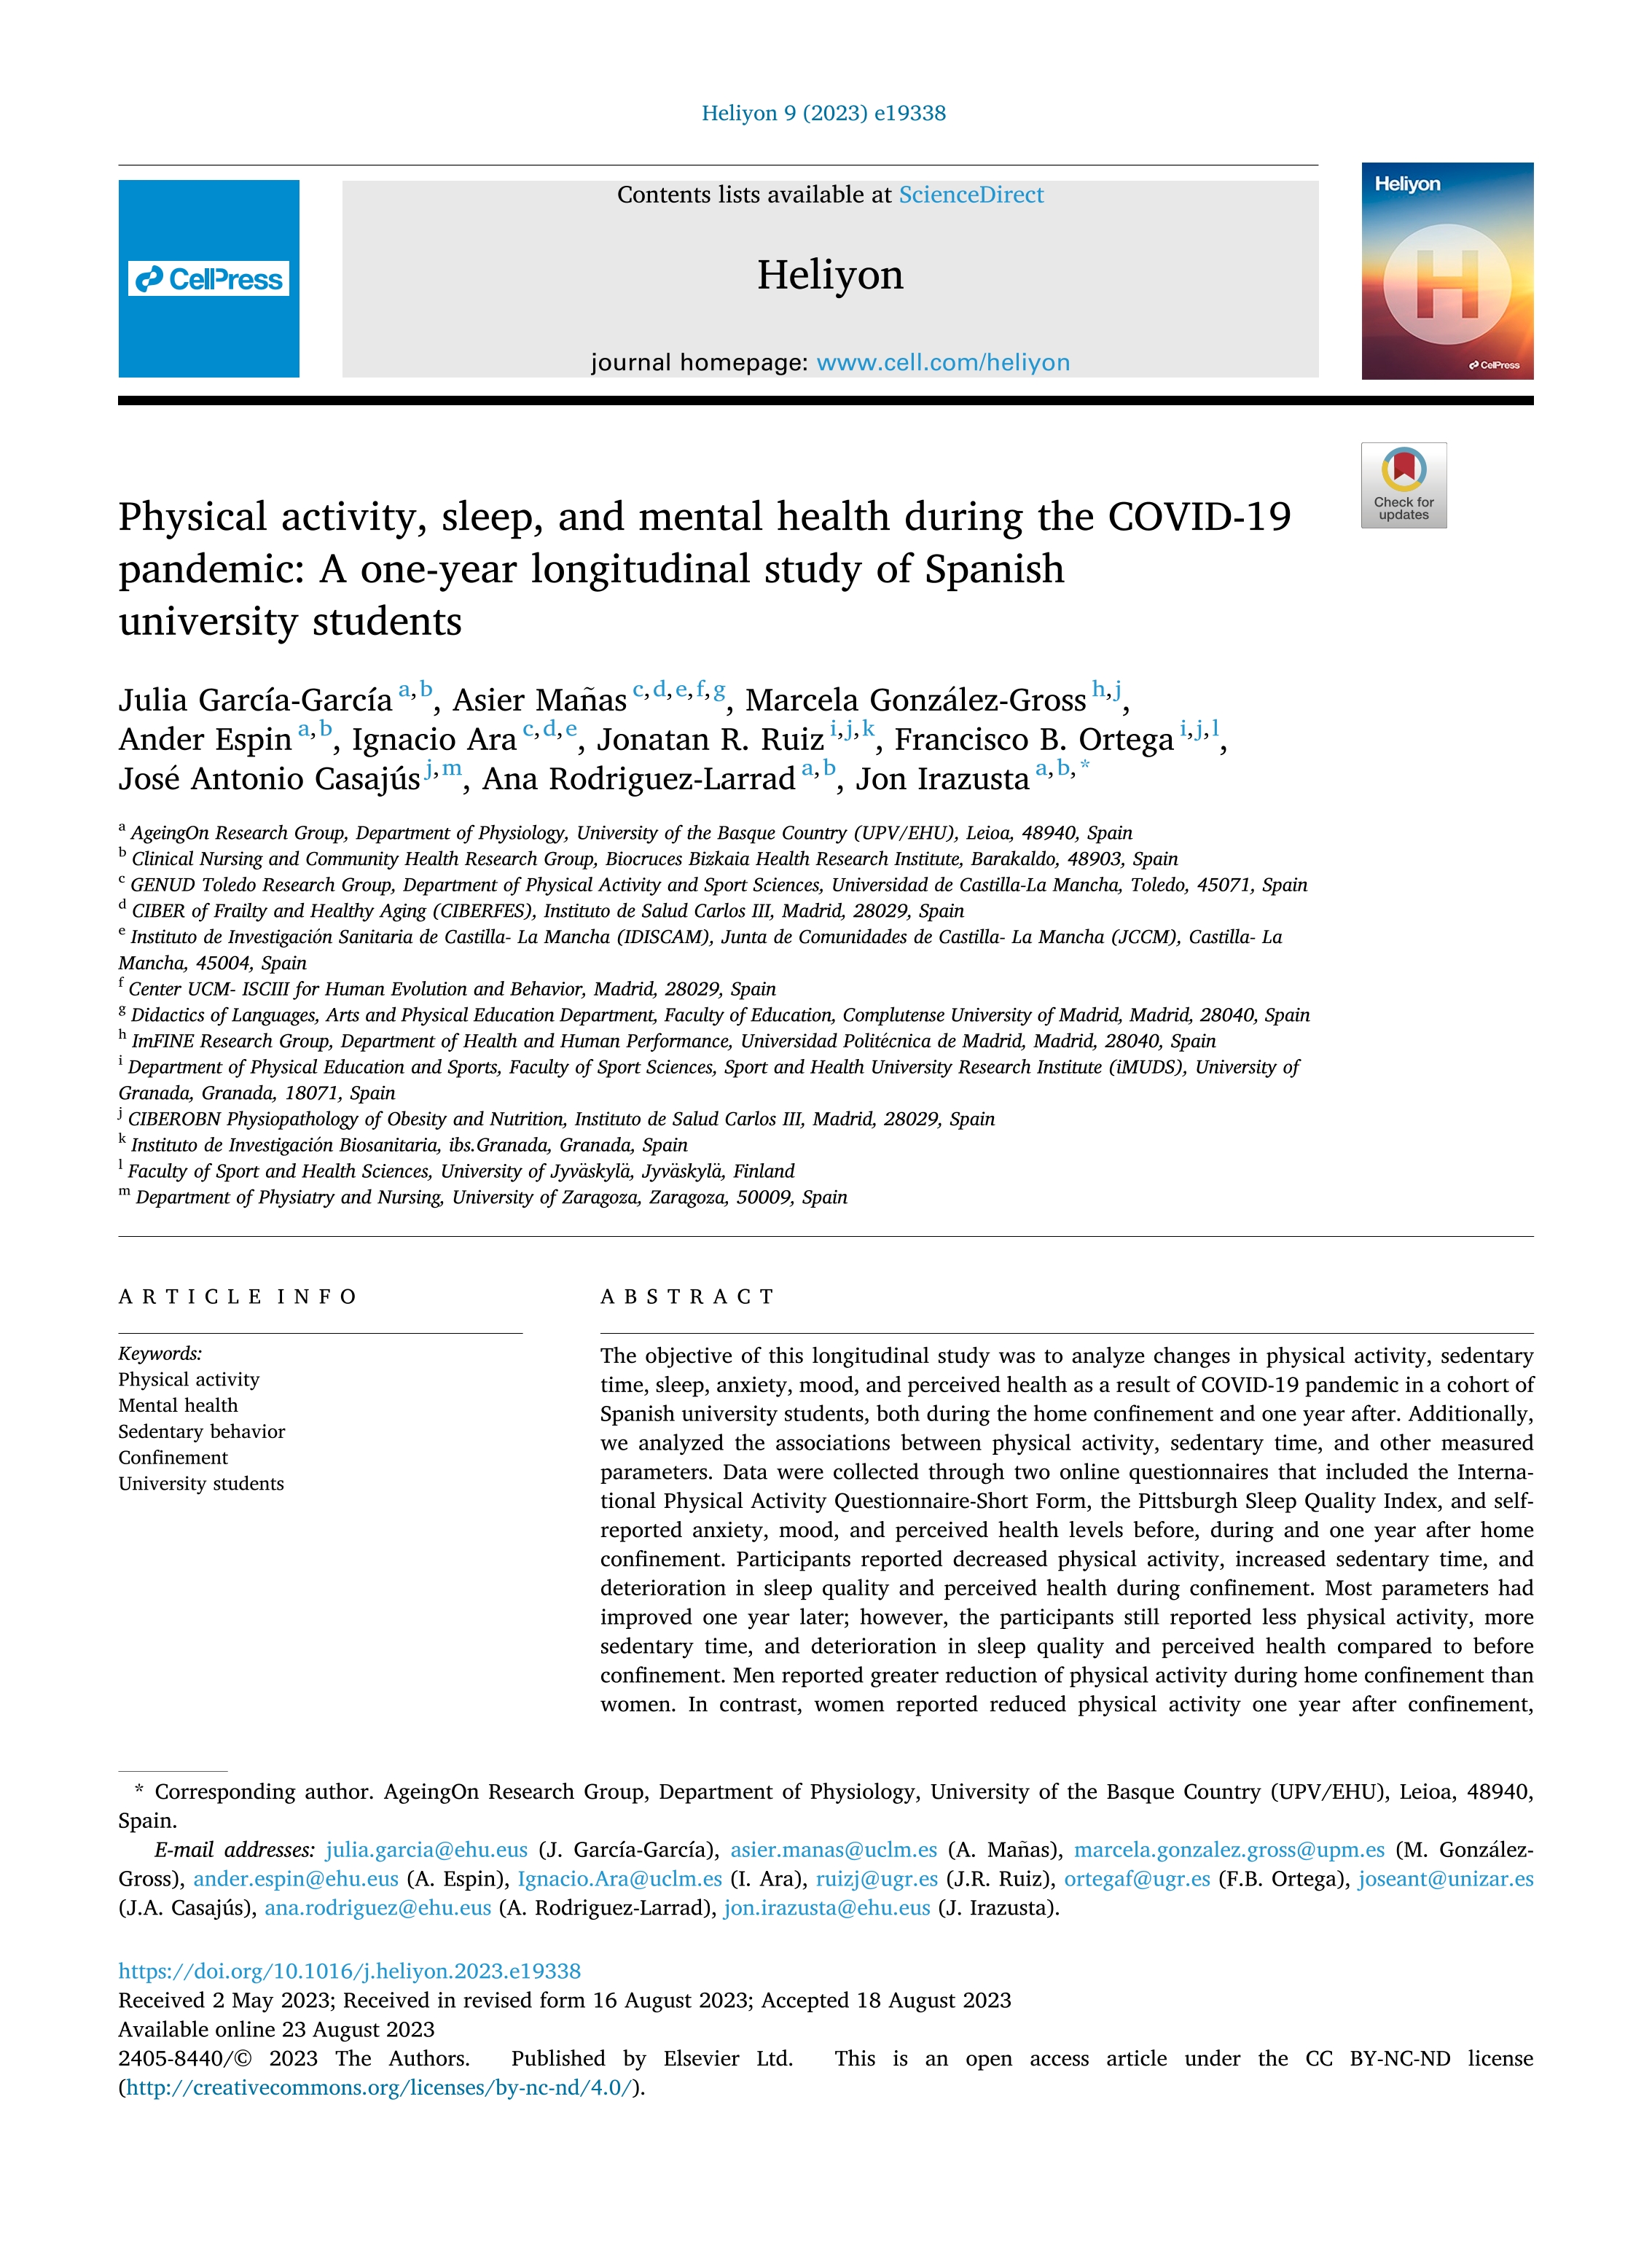 Physical activity, sleep, and mental health during the COVID-19 pandemic: A one-year longitudinal study of Spanish university students